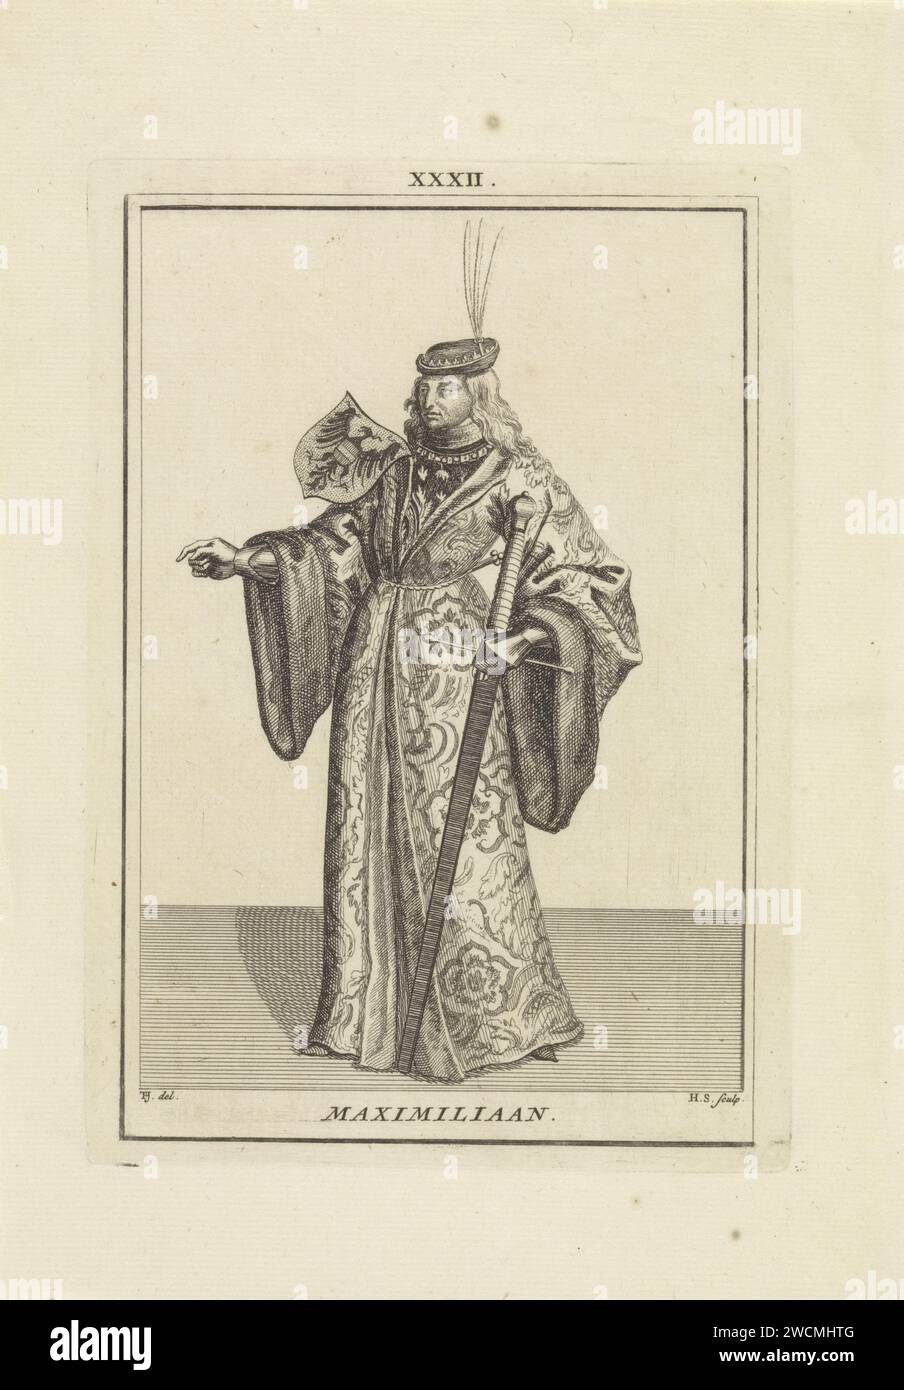 Portrait of Maximilian I van Habsburg (Roman-Germans Keizer), Hendrik Spilman, after Tako Hajo Jelgersma, after Anonymous, 1745 print Portrait of Maximilian I of Habsburg (Roman-German Emperor), standing to the left in a cloak. On his shoulder a coat of arms and a sword in his hand. In the middle of the top: XXV. Haarlem paper etching nobility and patriciate; chivalry, knighthood Stock Photo